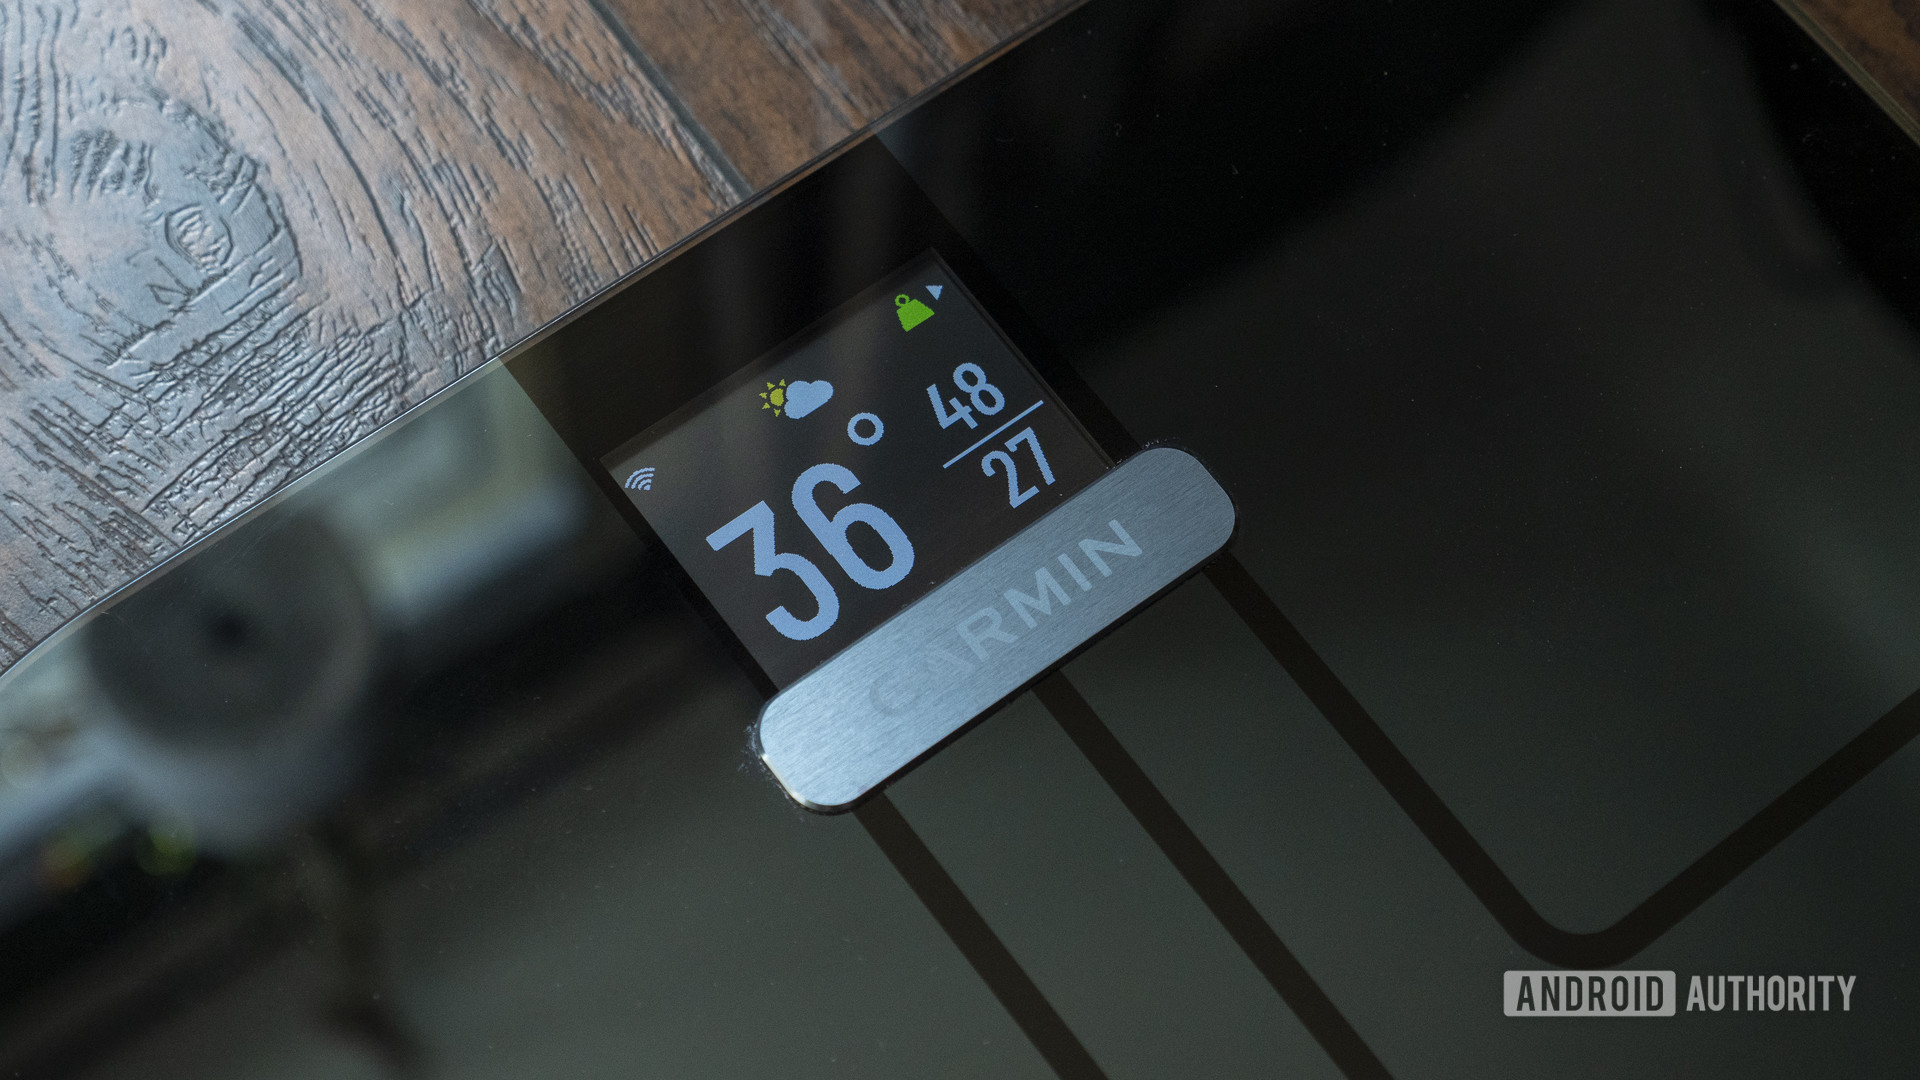 https://www.androidauthority.com/wp-content/uploads/2020/11/garmin-index-s2-smart-scale-review-weather.jpg